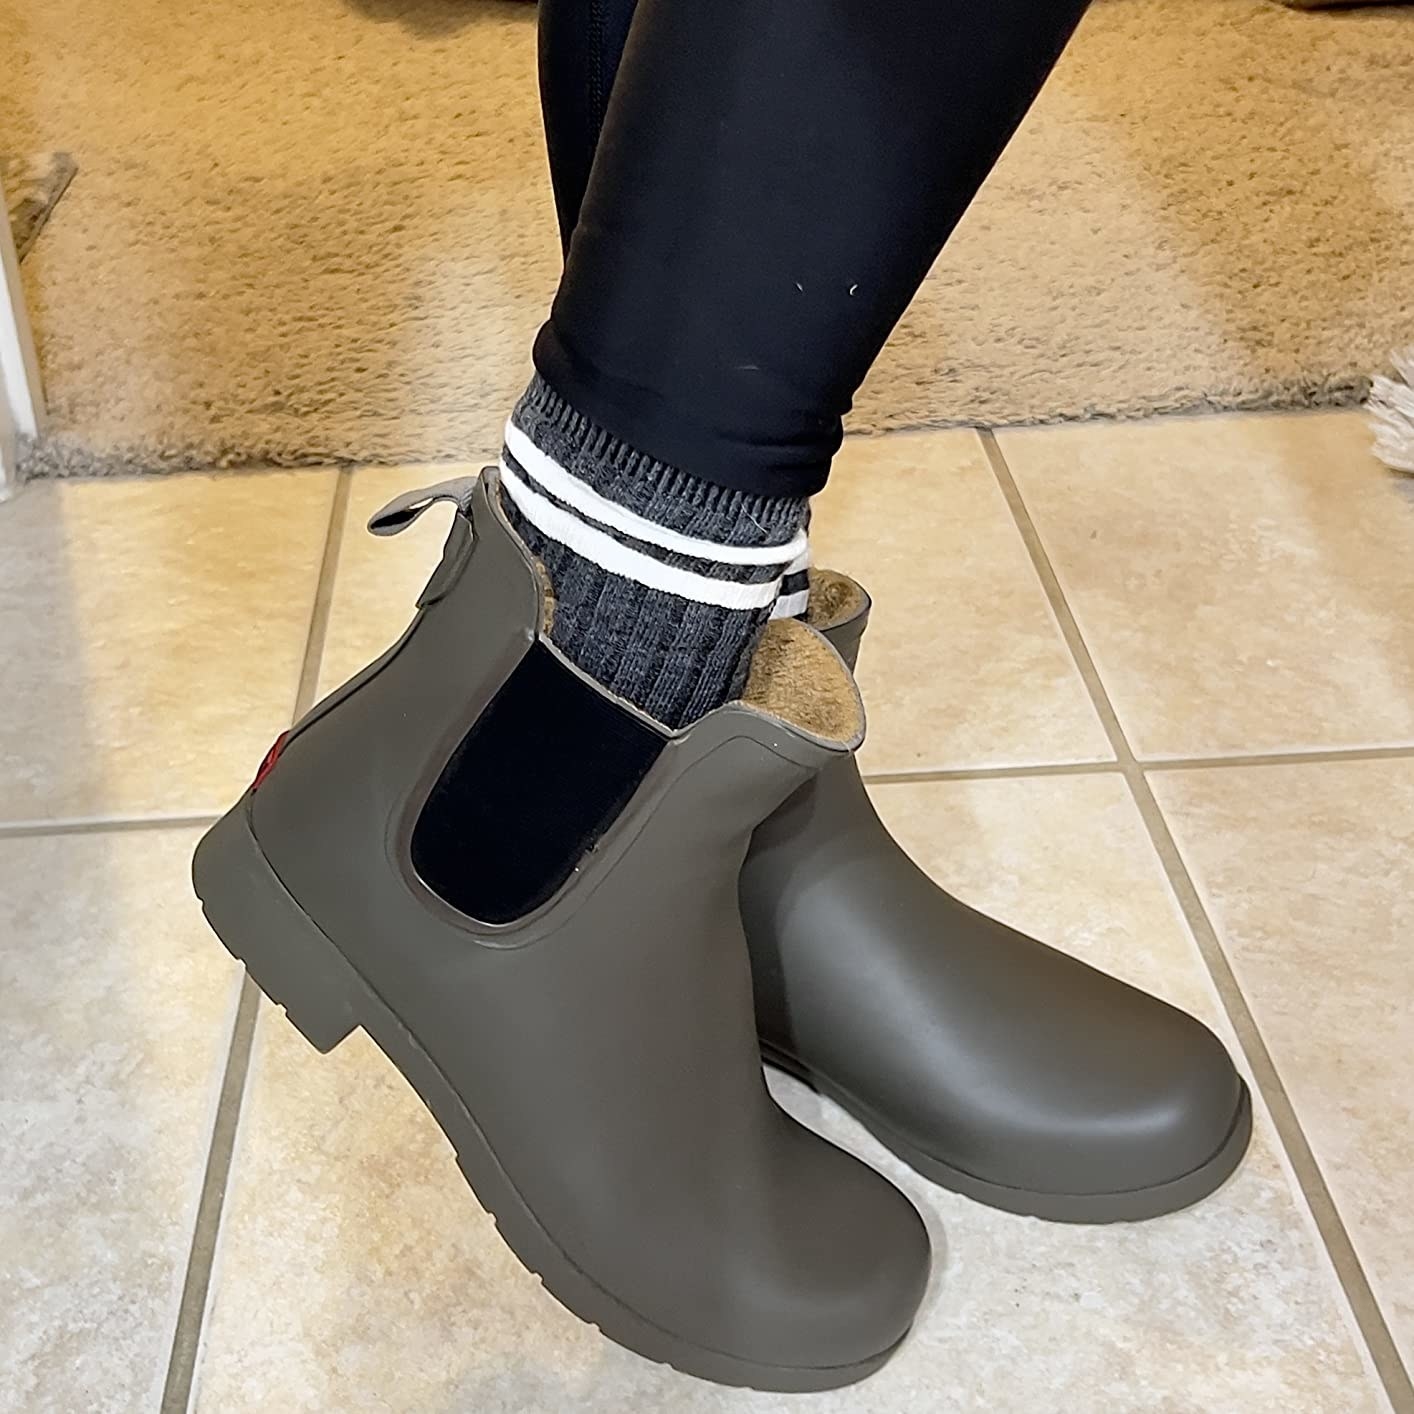 Reviewer wearig Chelsea boots